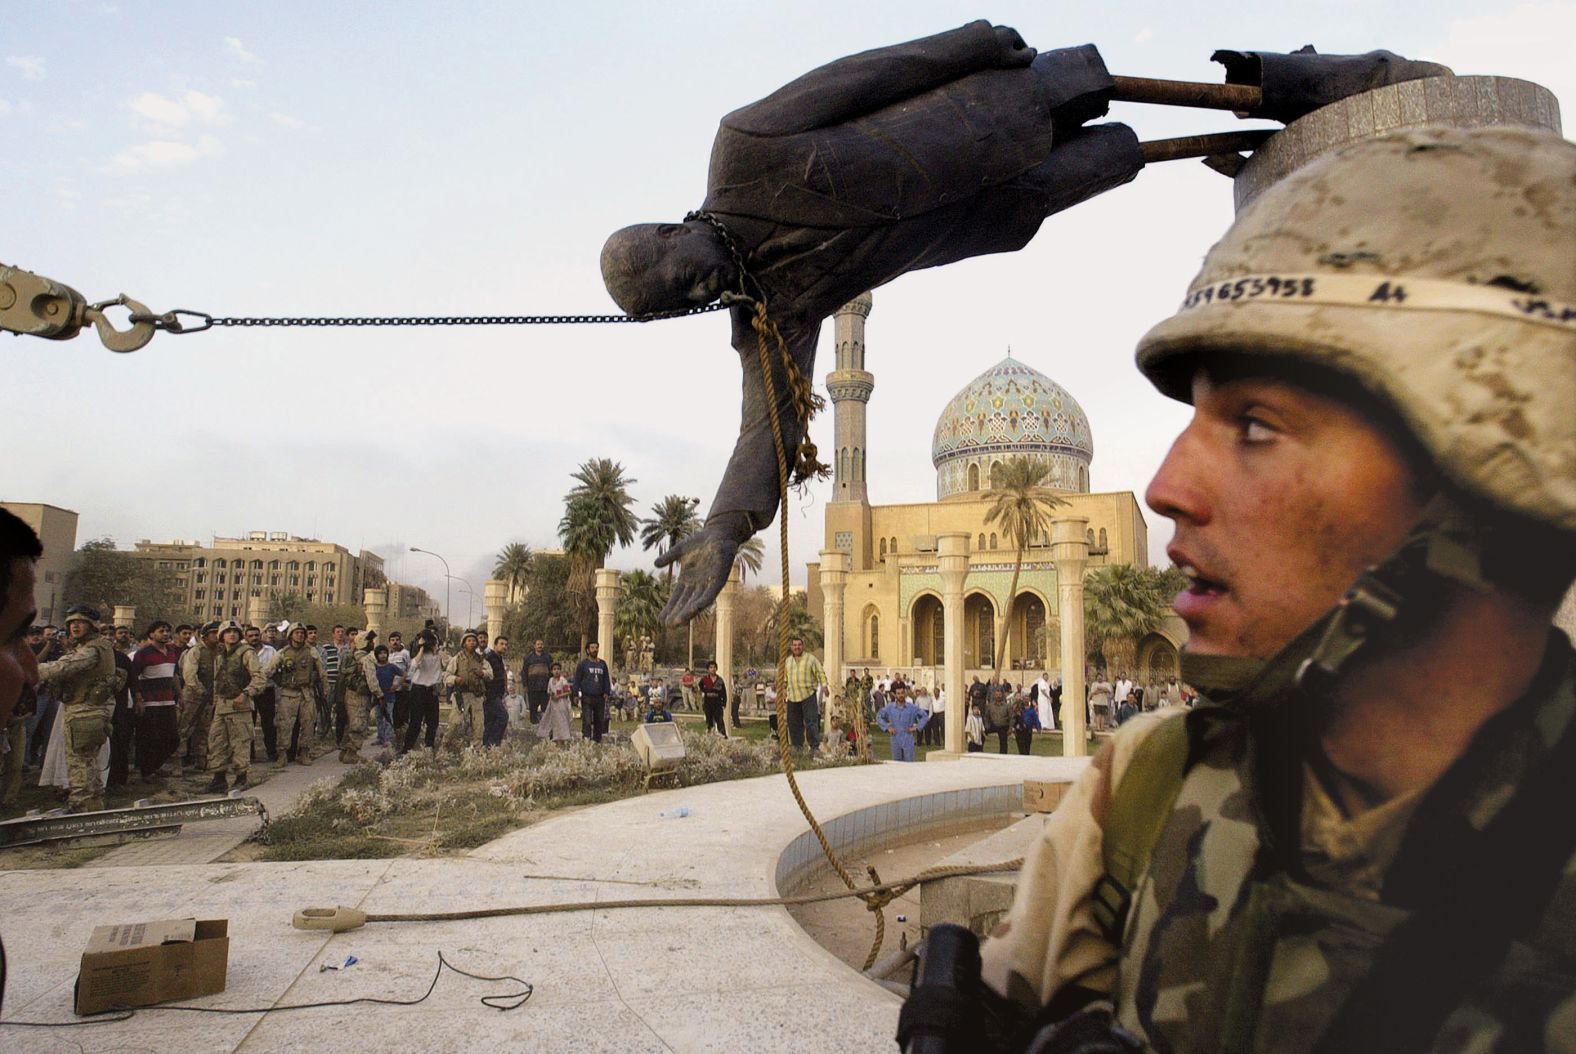 TV audiences around the world watched as US troops pulled down a statue of Saddam Hussein in downtown Baghdad in April 2003. Weeks earlier, coalition forces began military action against Hussein's regime in Iraq.